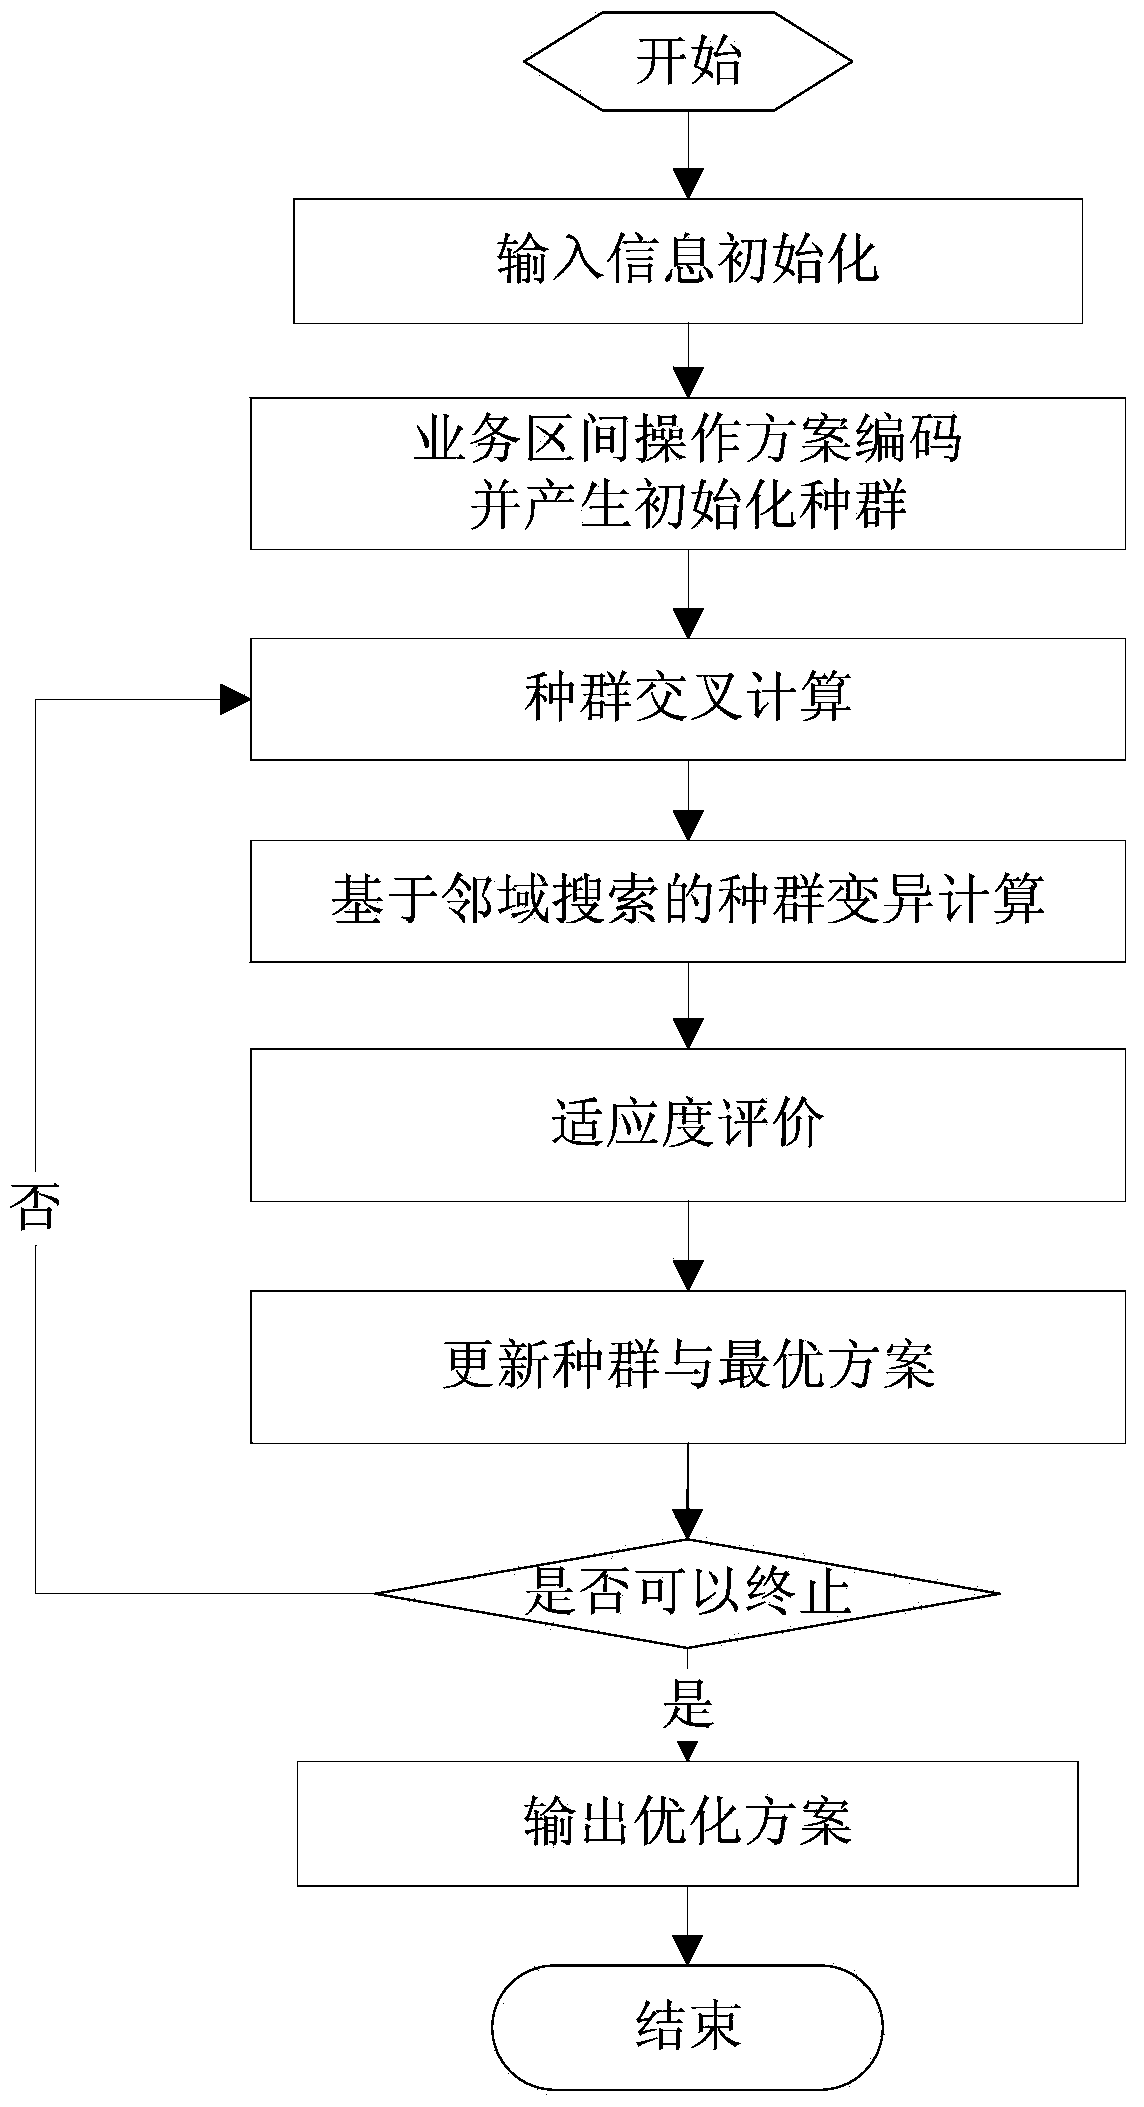 Dynamic goods allocation planning method and system for processing multi-variety goods and material storage